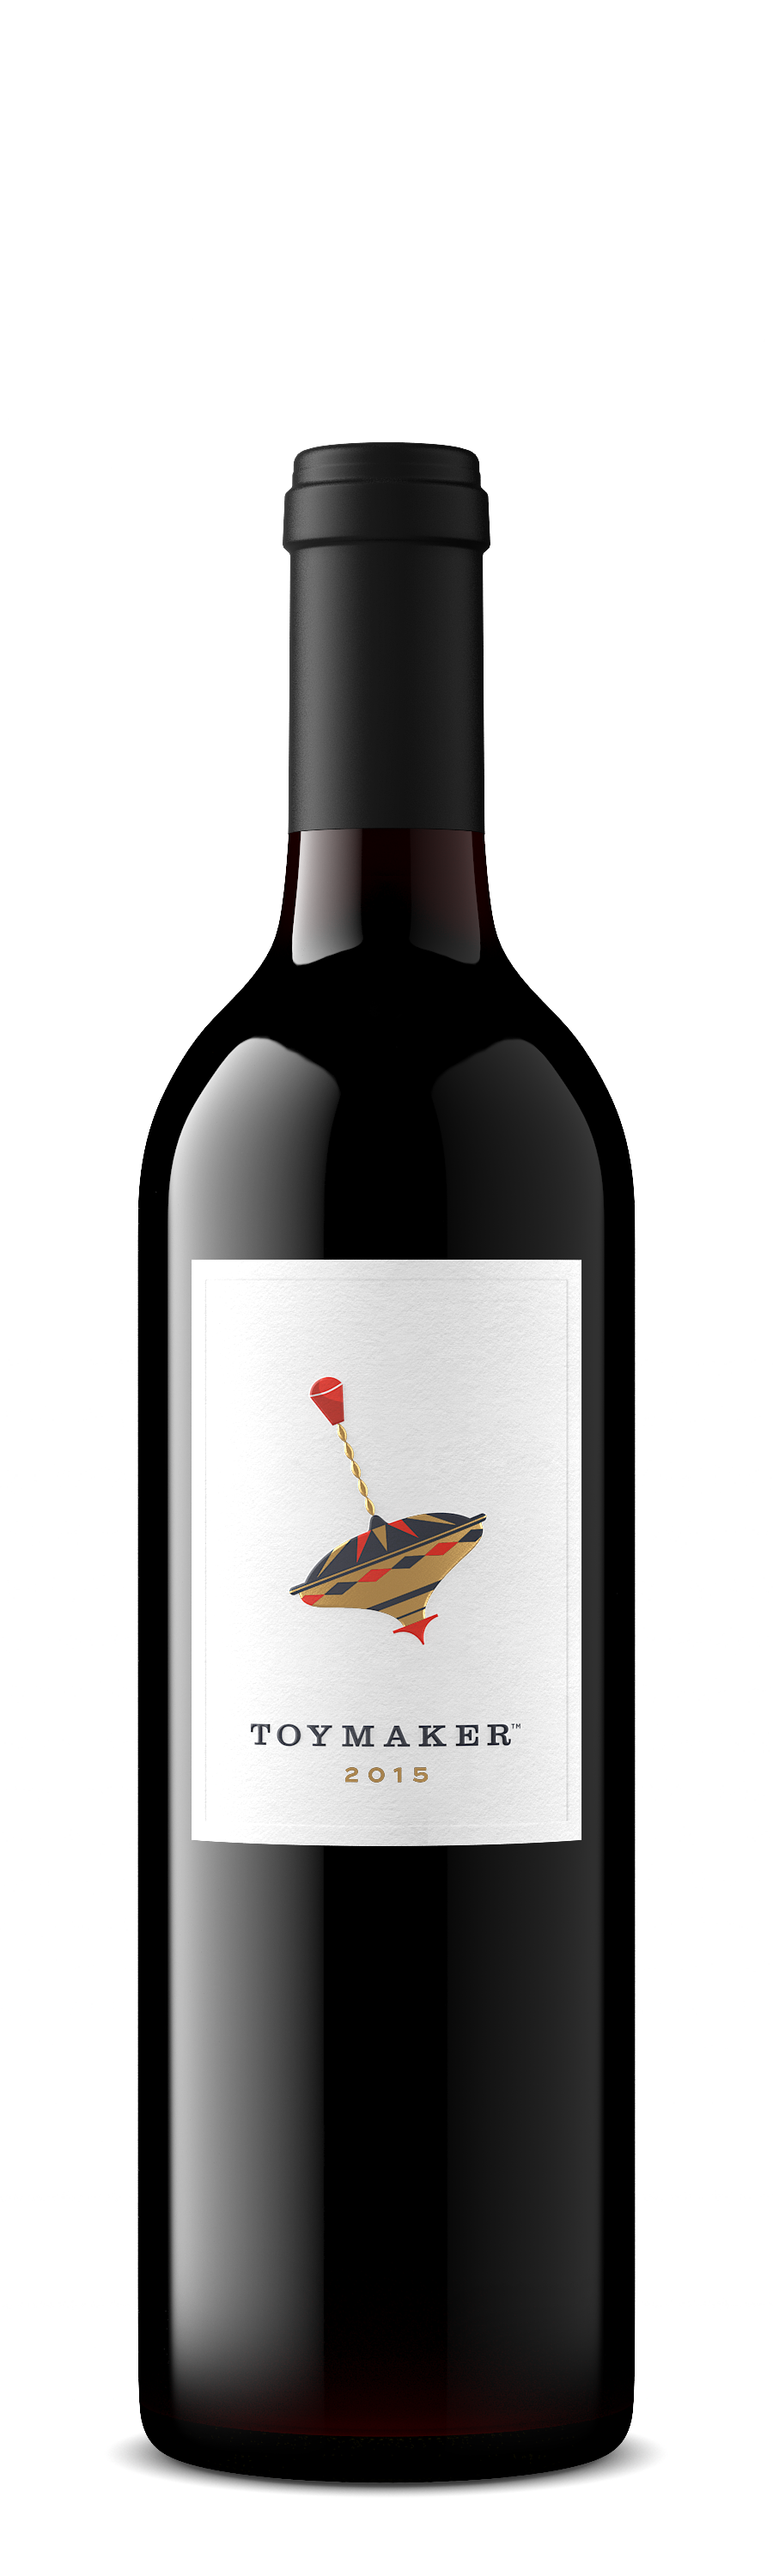 2015 ToyMaker Cellars Cabernet Sauvignon, Red Wine, Napa Valley, California, made by winemaker Martha McClellan of Sloan Estate, Checkerboard Vineyards, Levy & McClellan, and formerly of Harlan Estate. Best Napa Valley Grand Cru red wines.